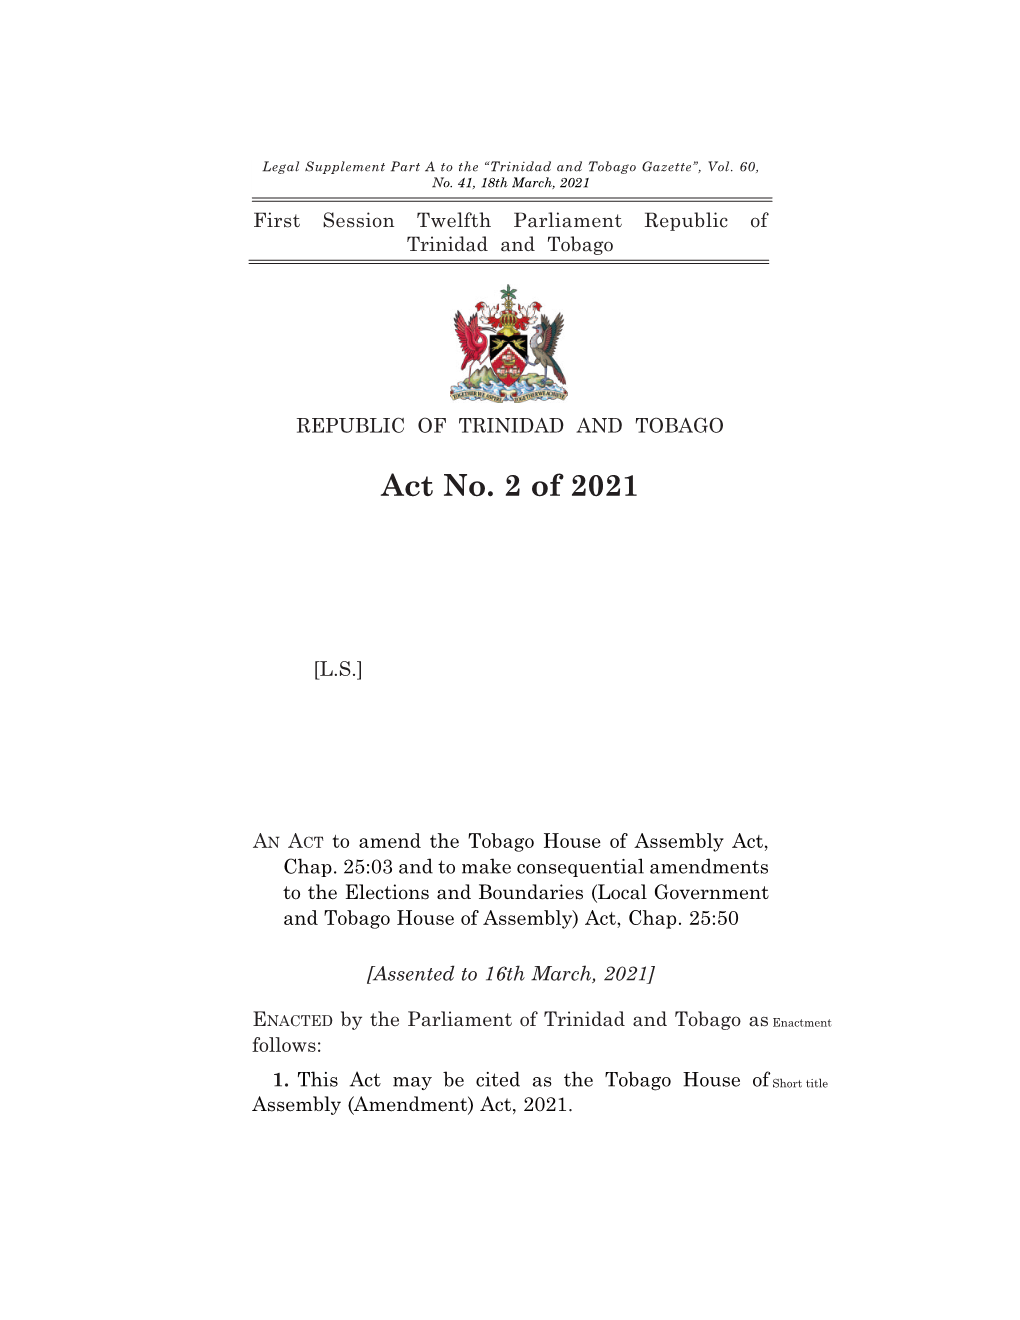 The Tobago House of Assembly (Amendment) Act, 2021